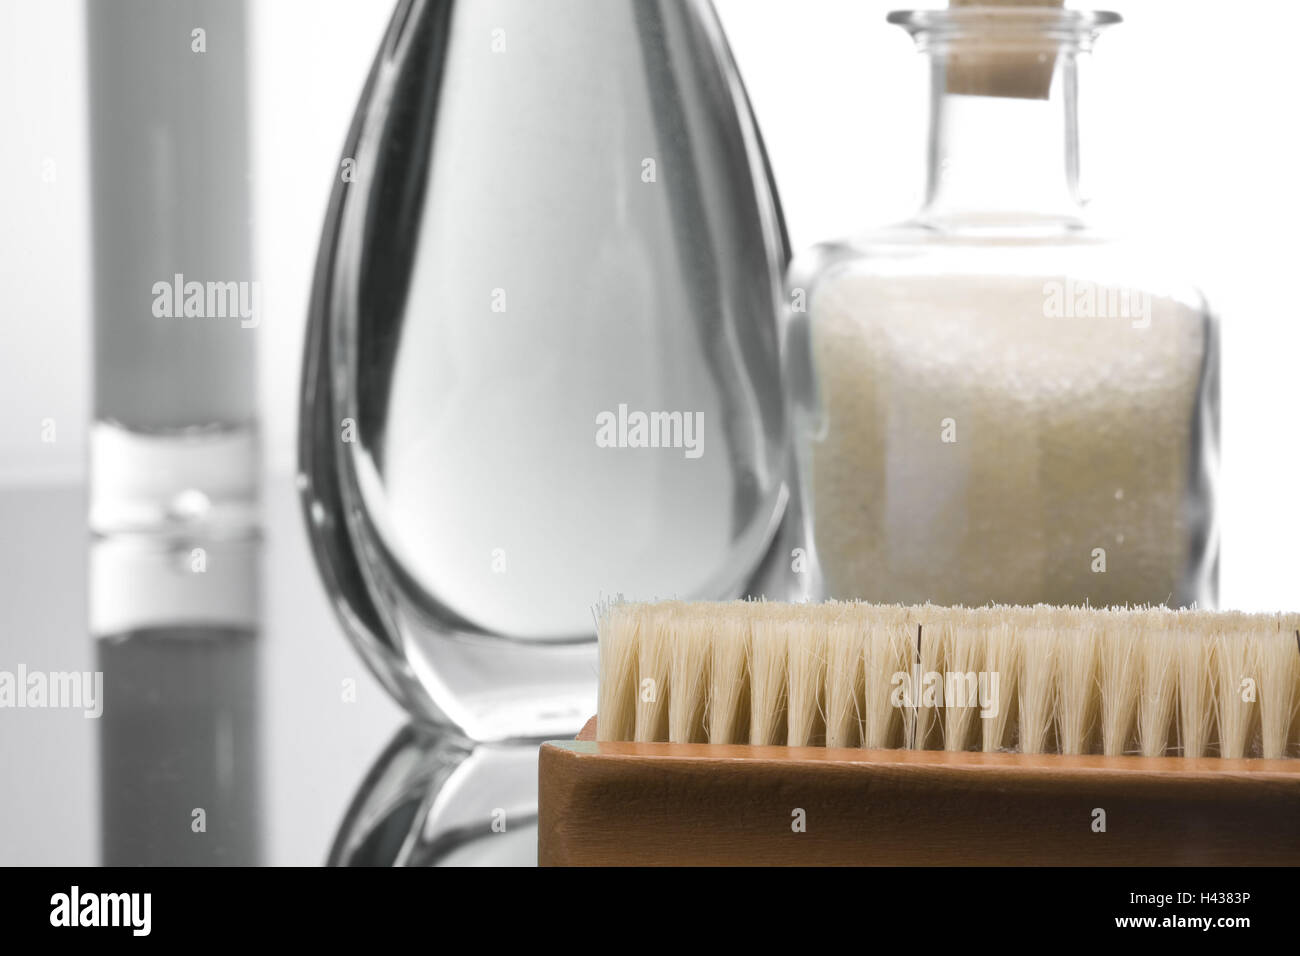 Decanters, bath products, differently, brush, detail, Stock Photo